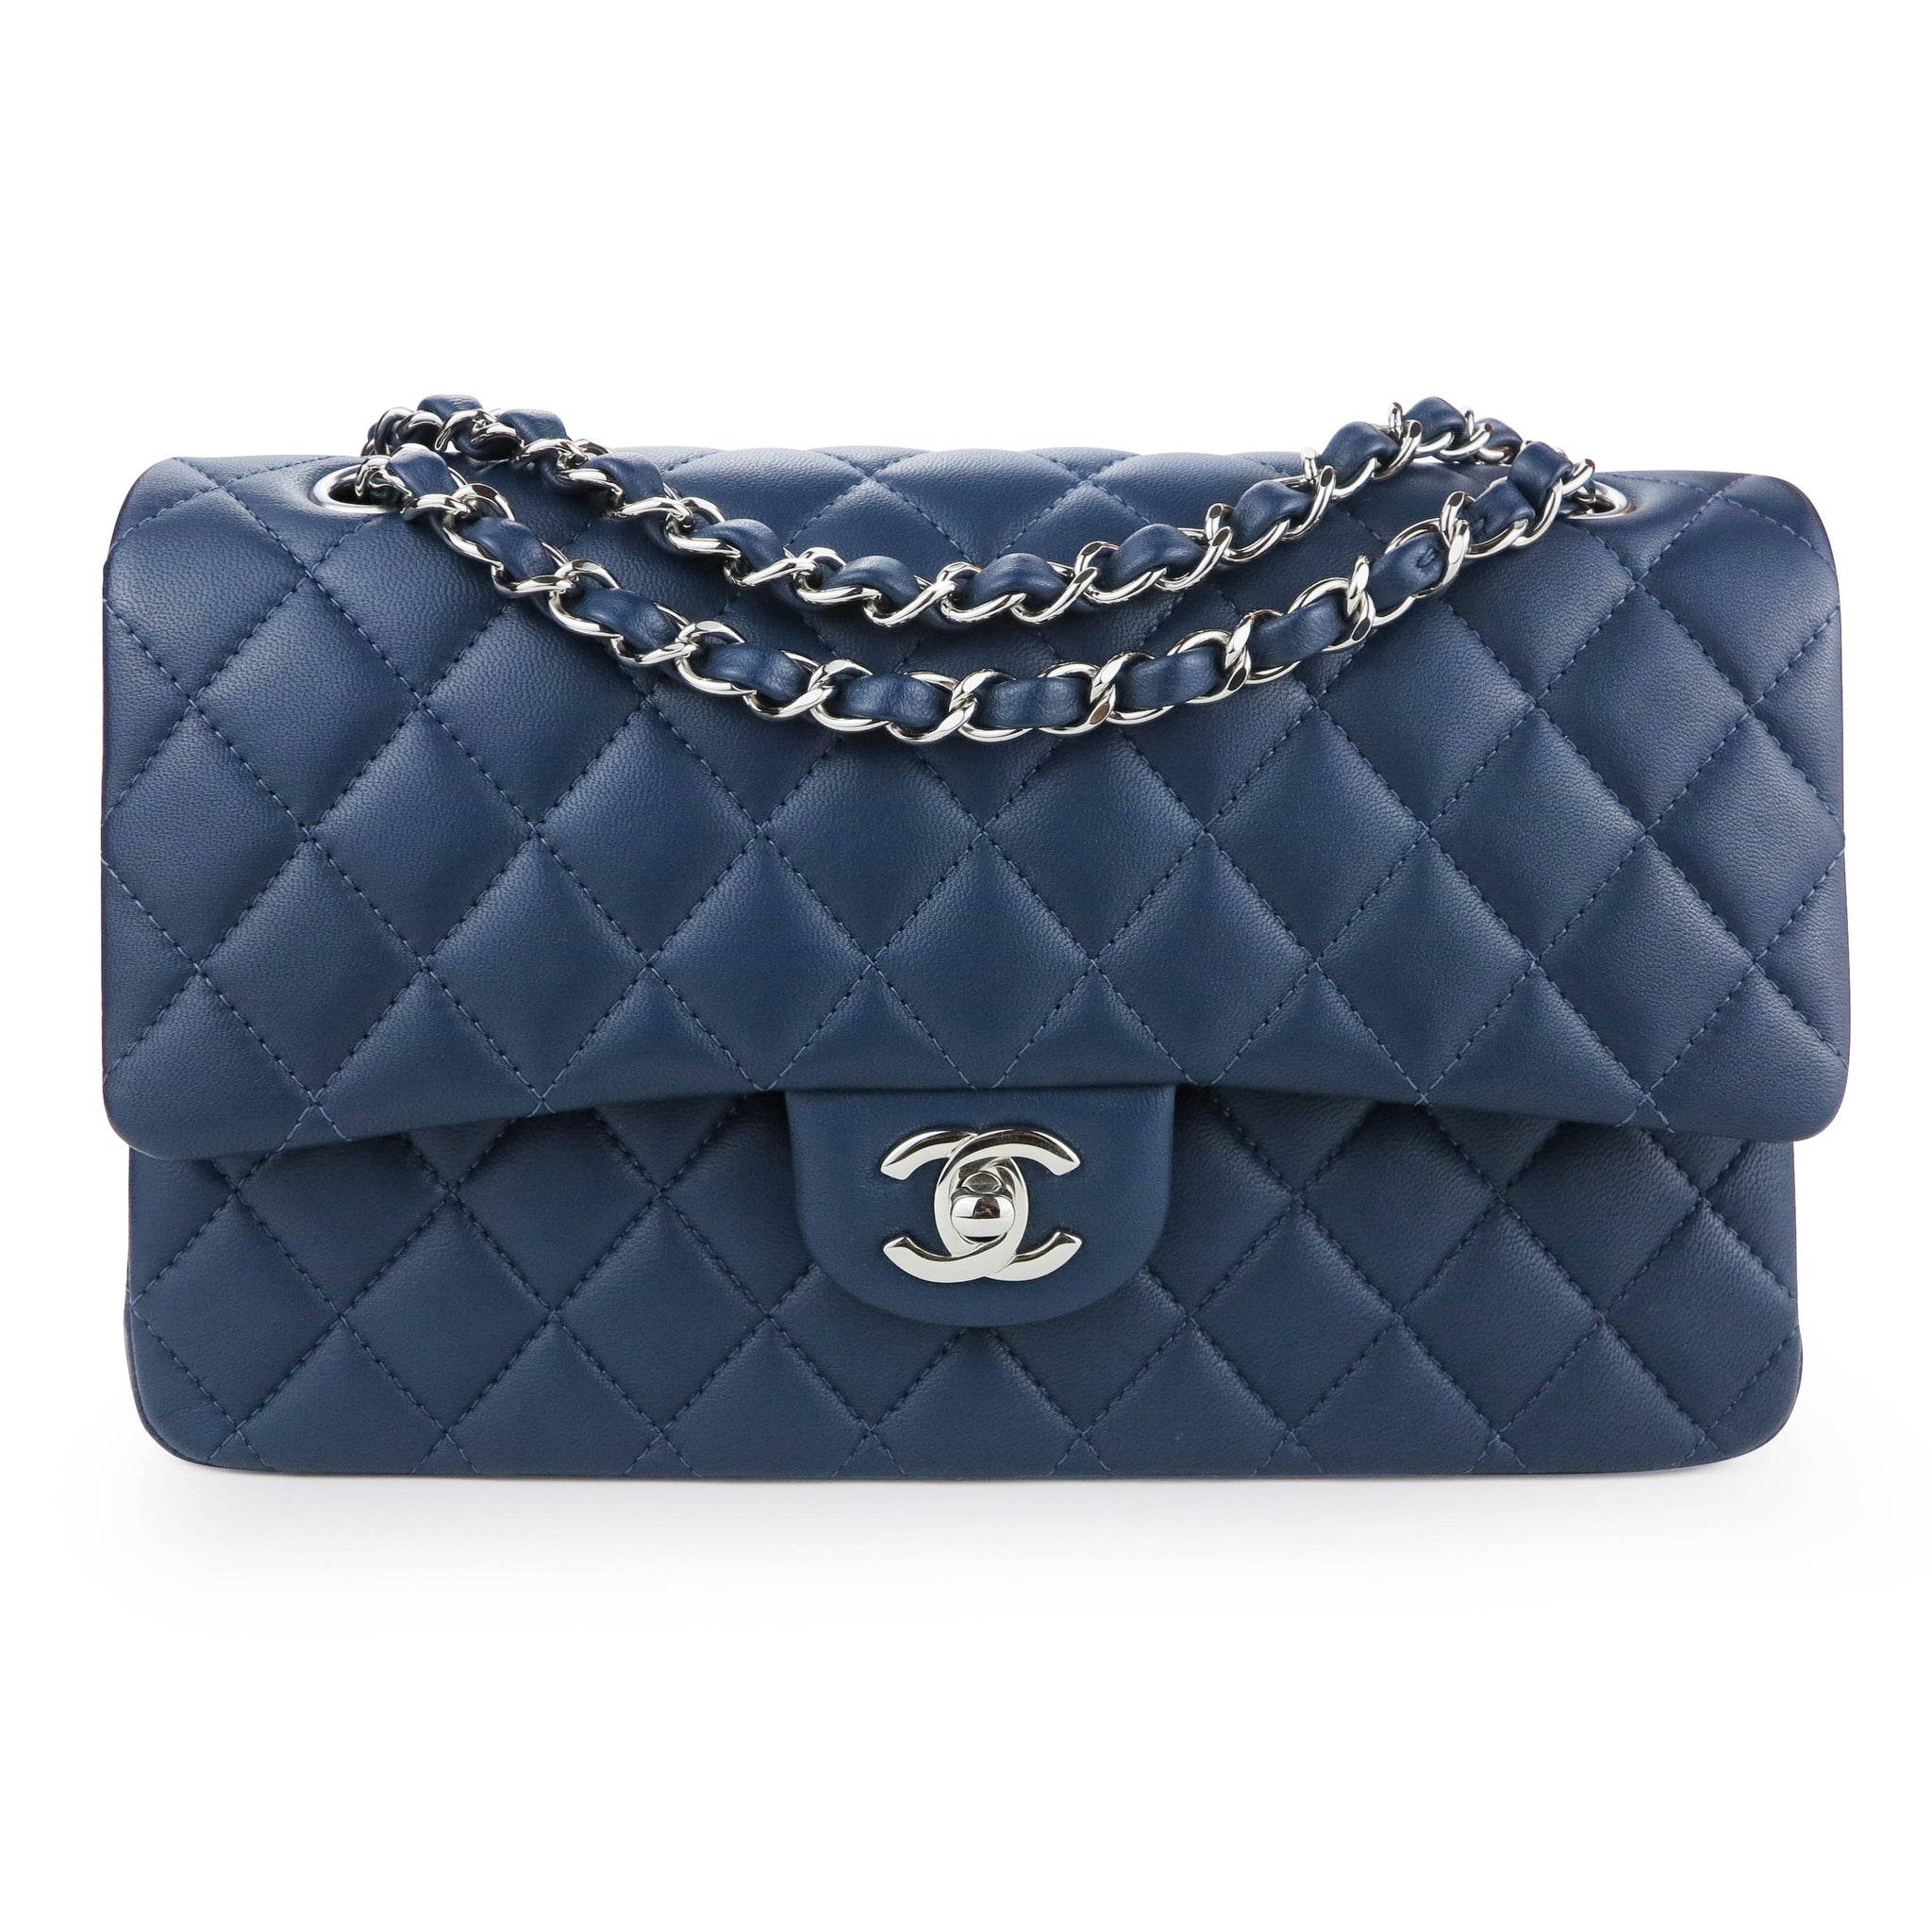 Unboxing the Chanel Navy Blue Caviar Leather Boy Bag  YouTube